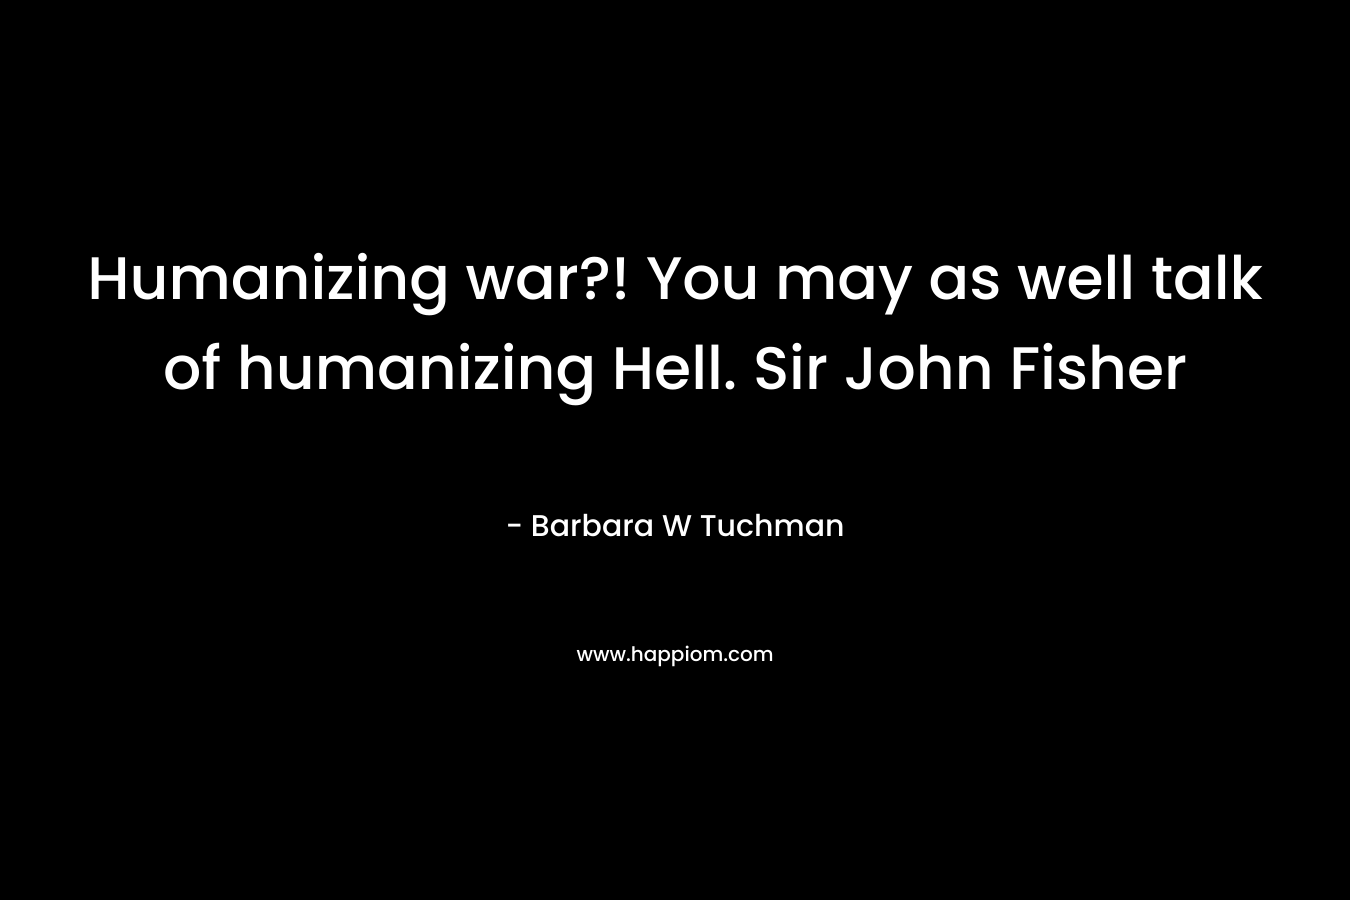 Humanizing war?! You may as well talk of humanizing Hell. Sir John Fisher